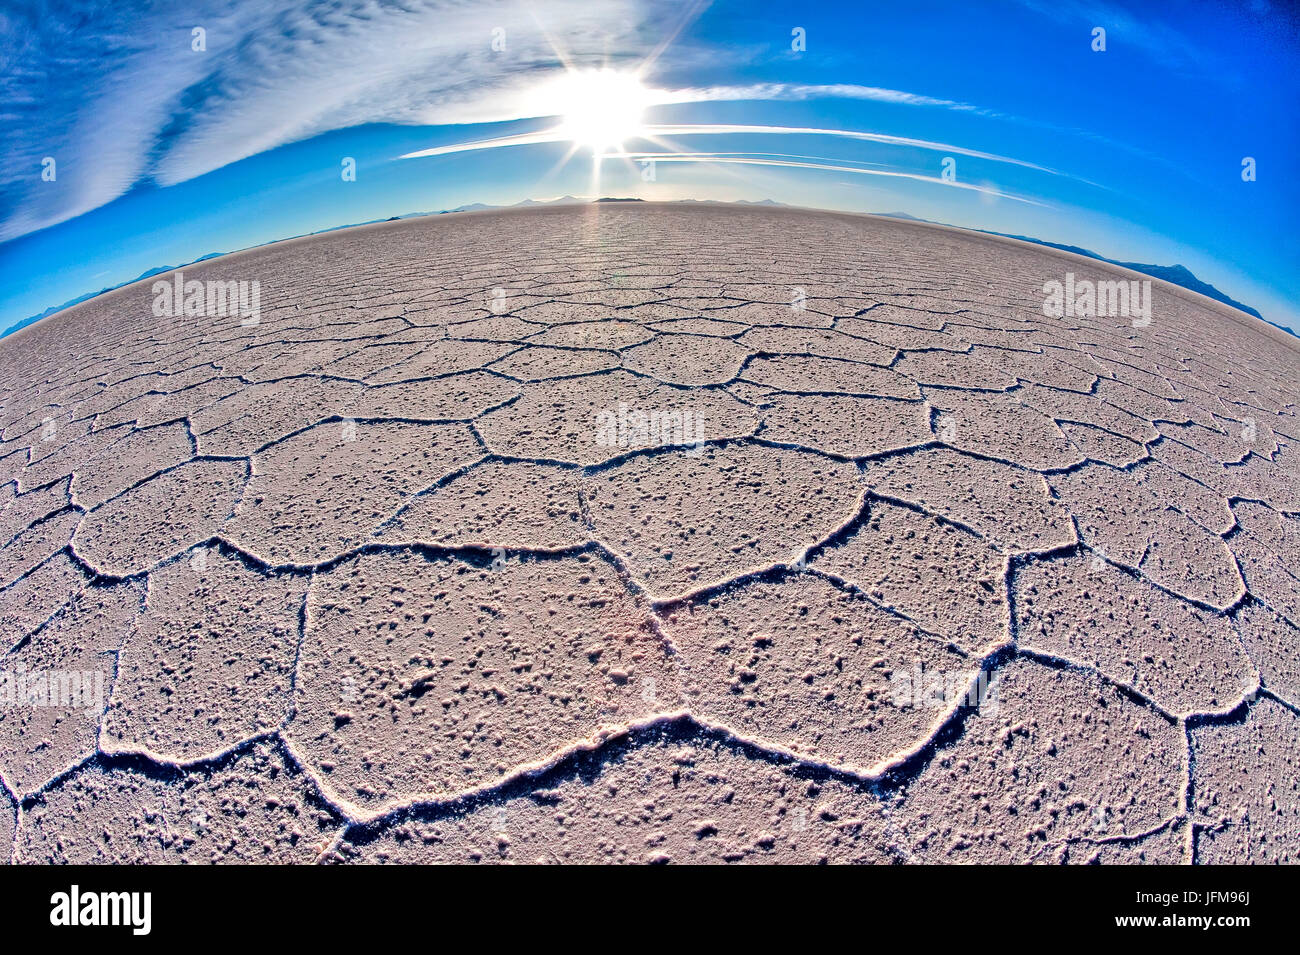 The curvature of the earth is accentuated by fish eye effect in the huge expanse of salt in the Salar de Uyuni, South Lipez, Bolivia, South America Stock Photo